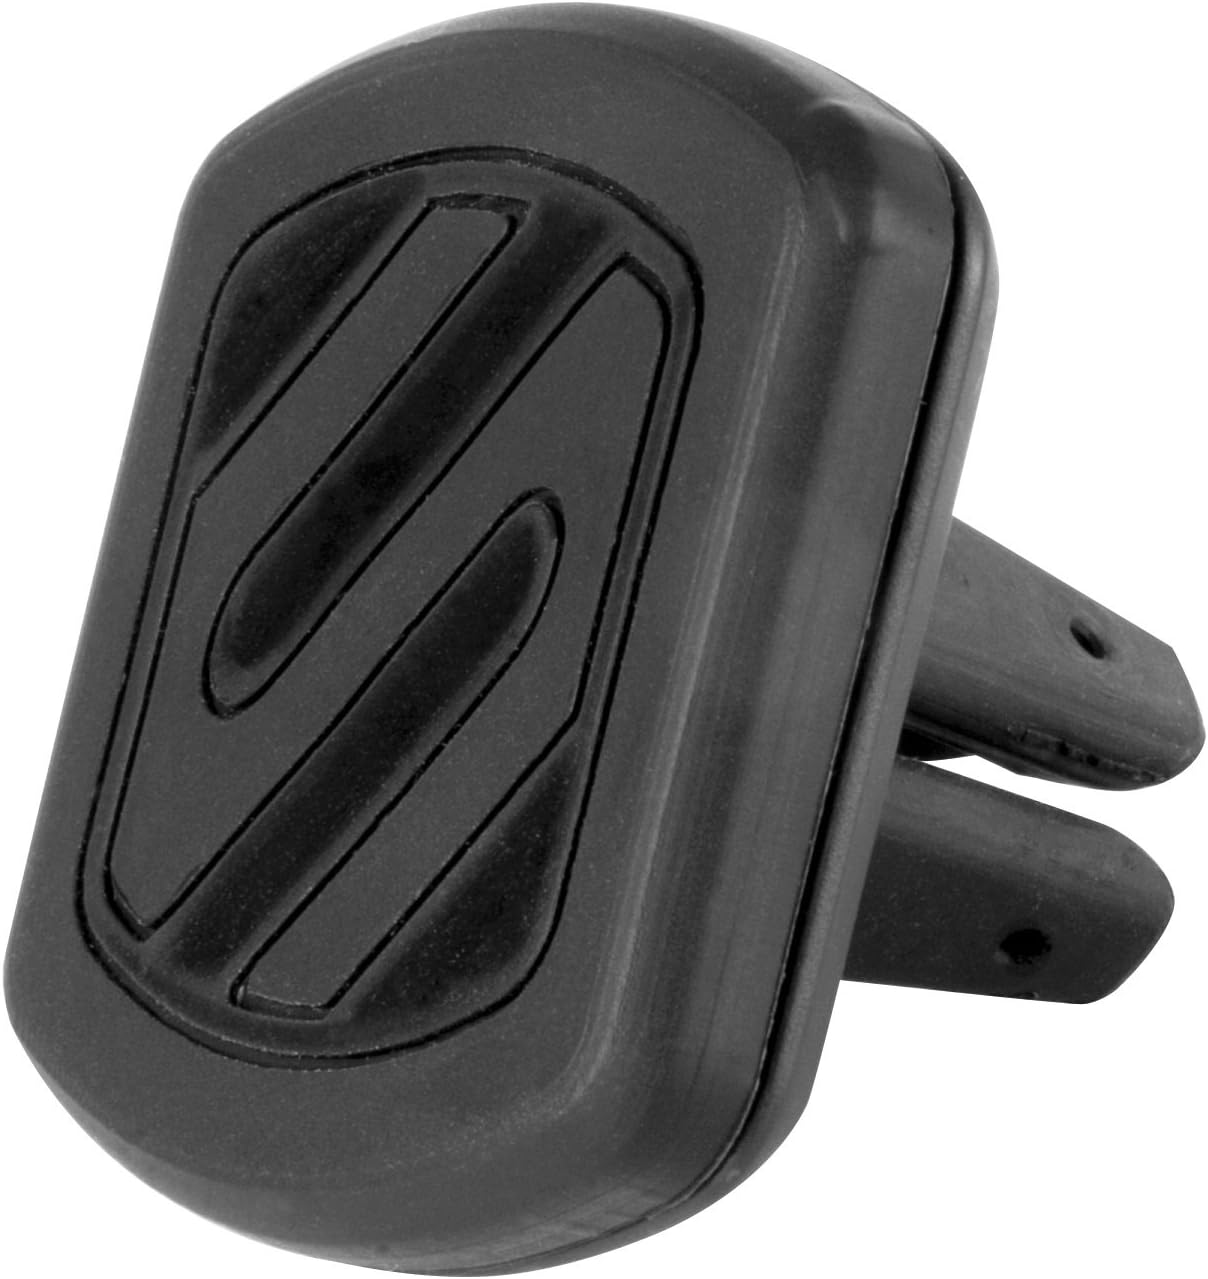 Scosche MagicMount Universal Car Vent Holder for Mobile Devices MAGVM2i - Black